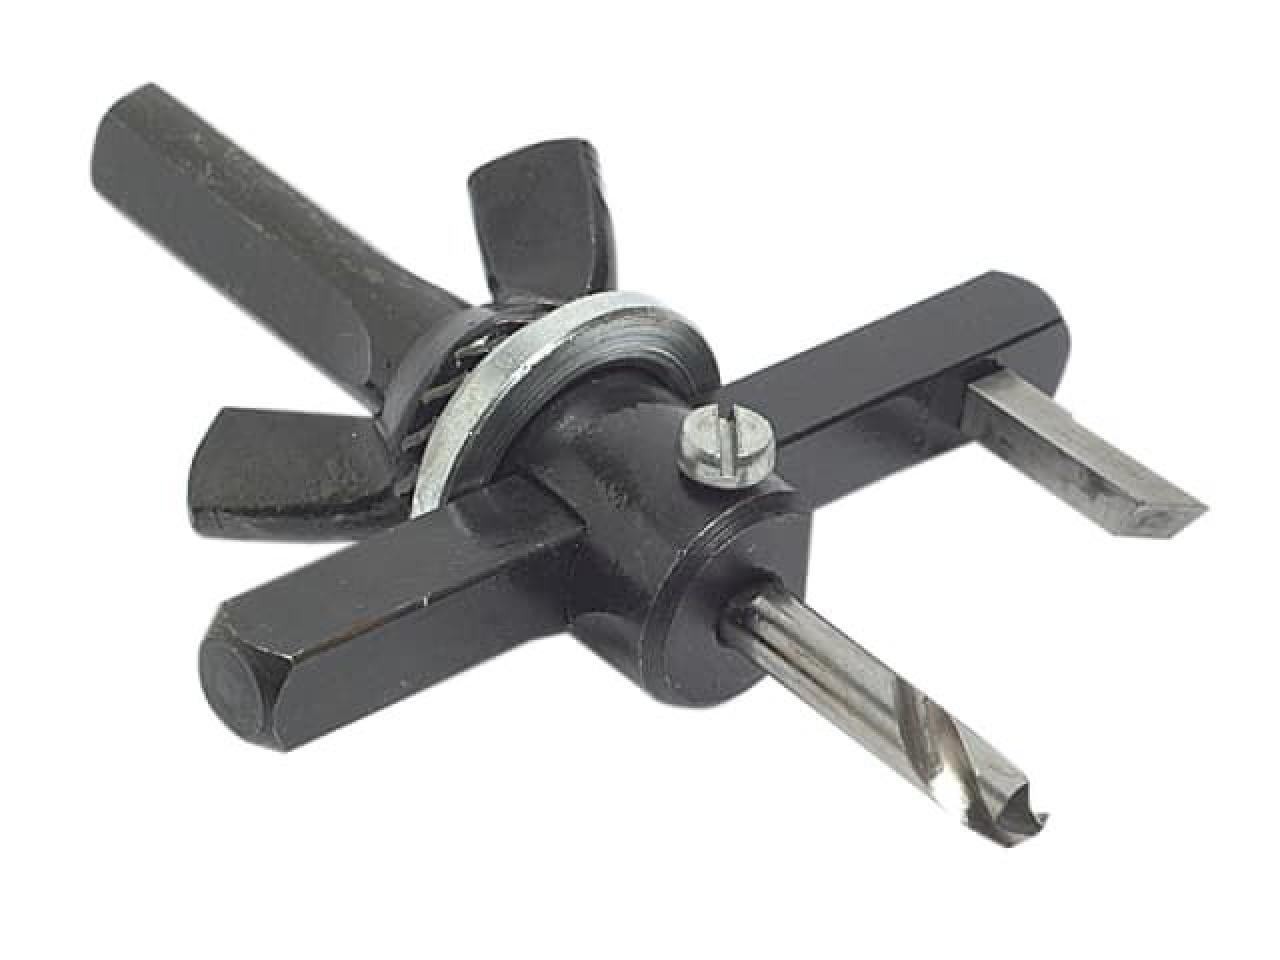 Priory - 400 Tank Cutter for Hand Brace/Drill Stand 125mm (5in) - image 1 of 1